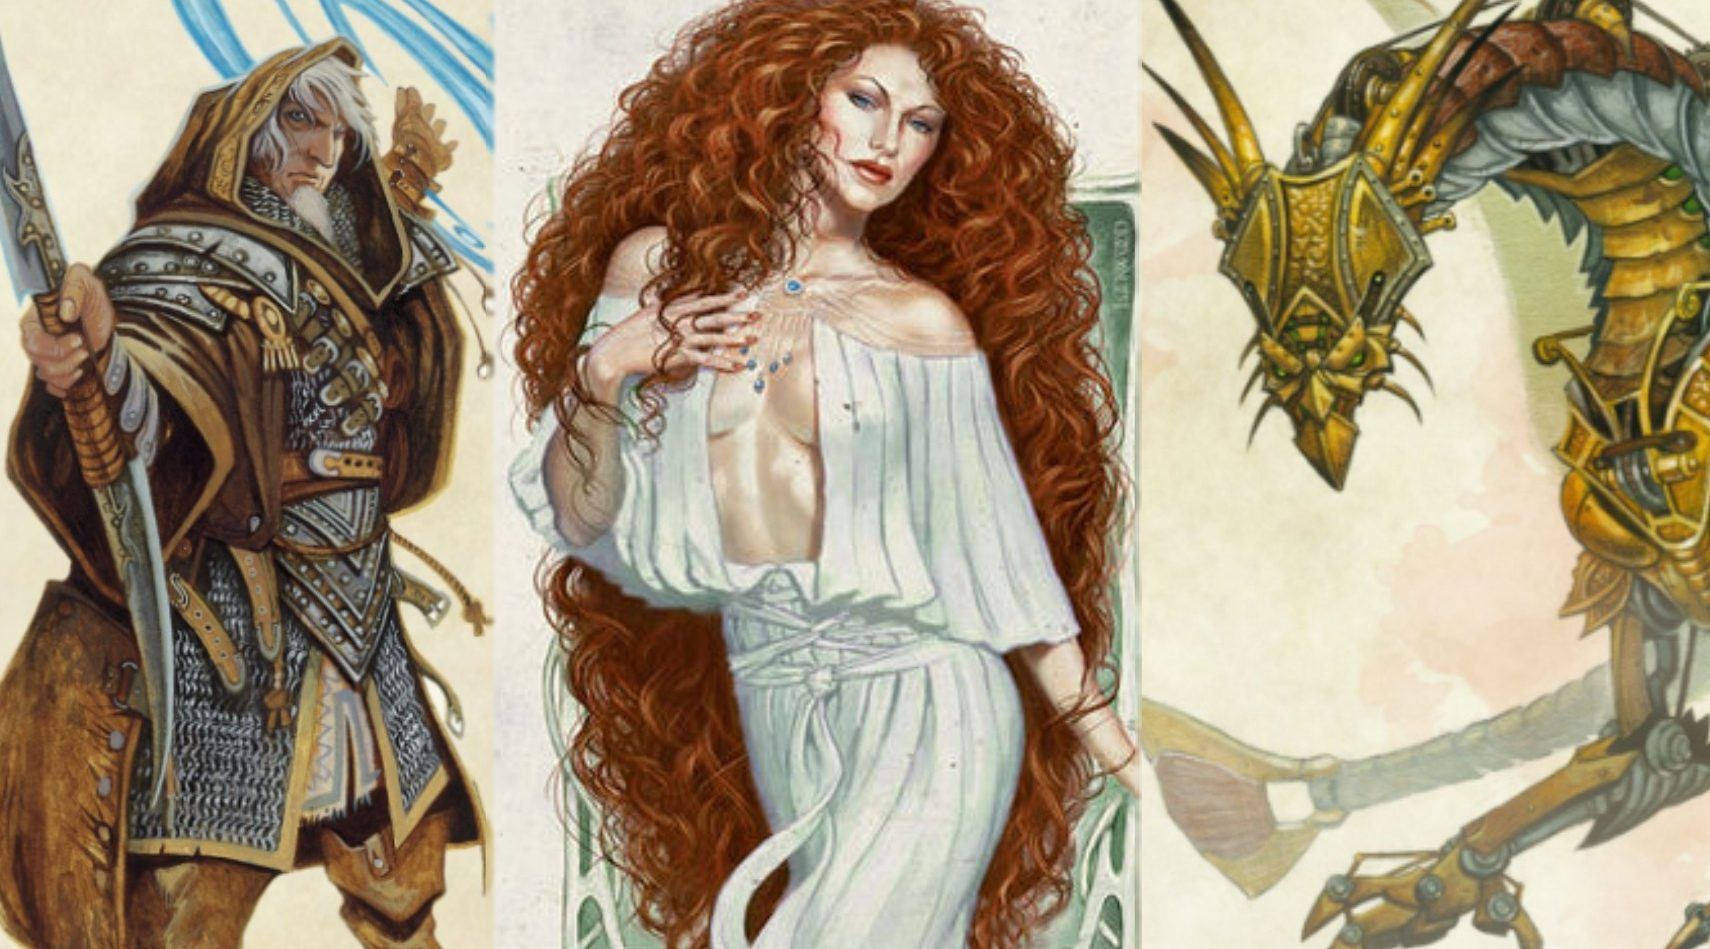 New Dungeons & Dragons Unearthed Arcana Is About The Power Of Love (And